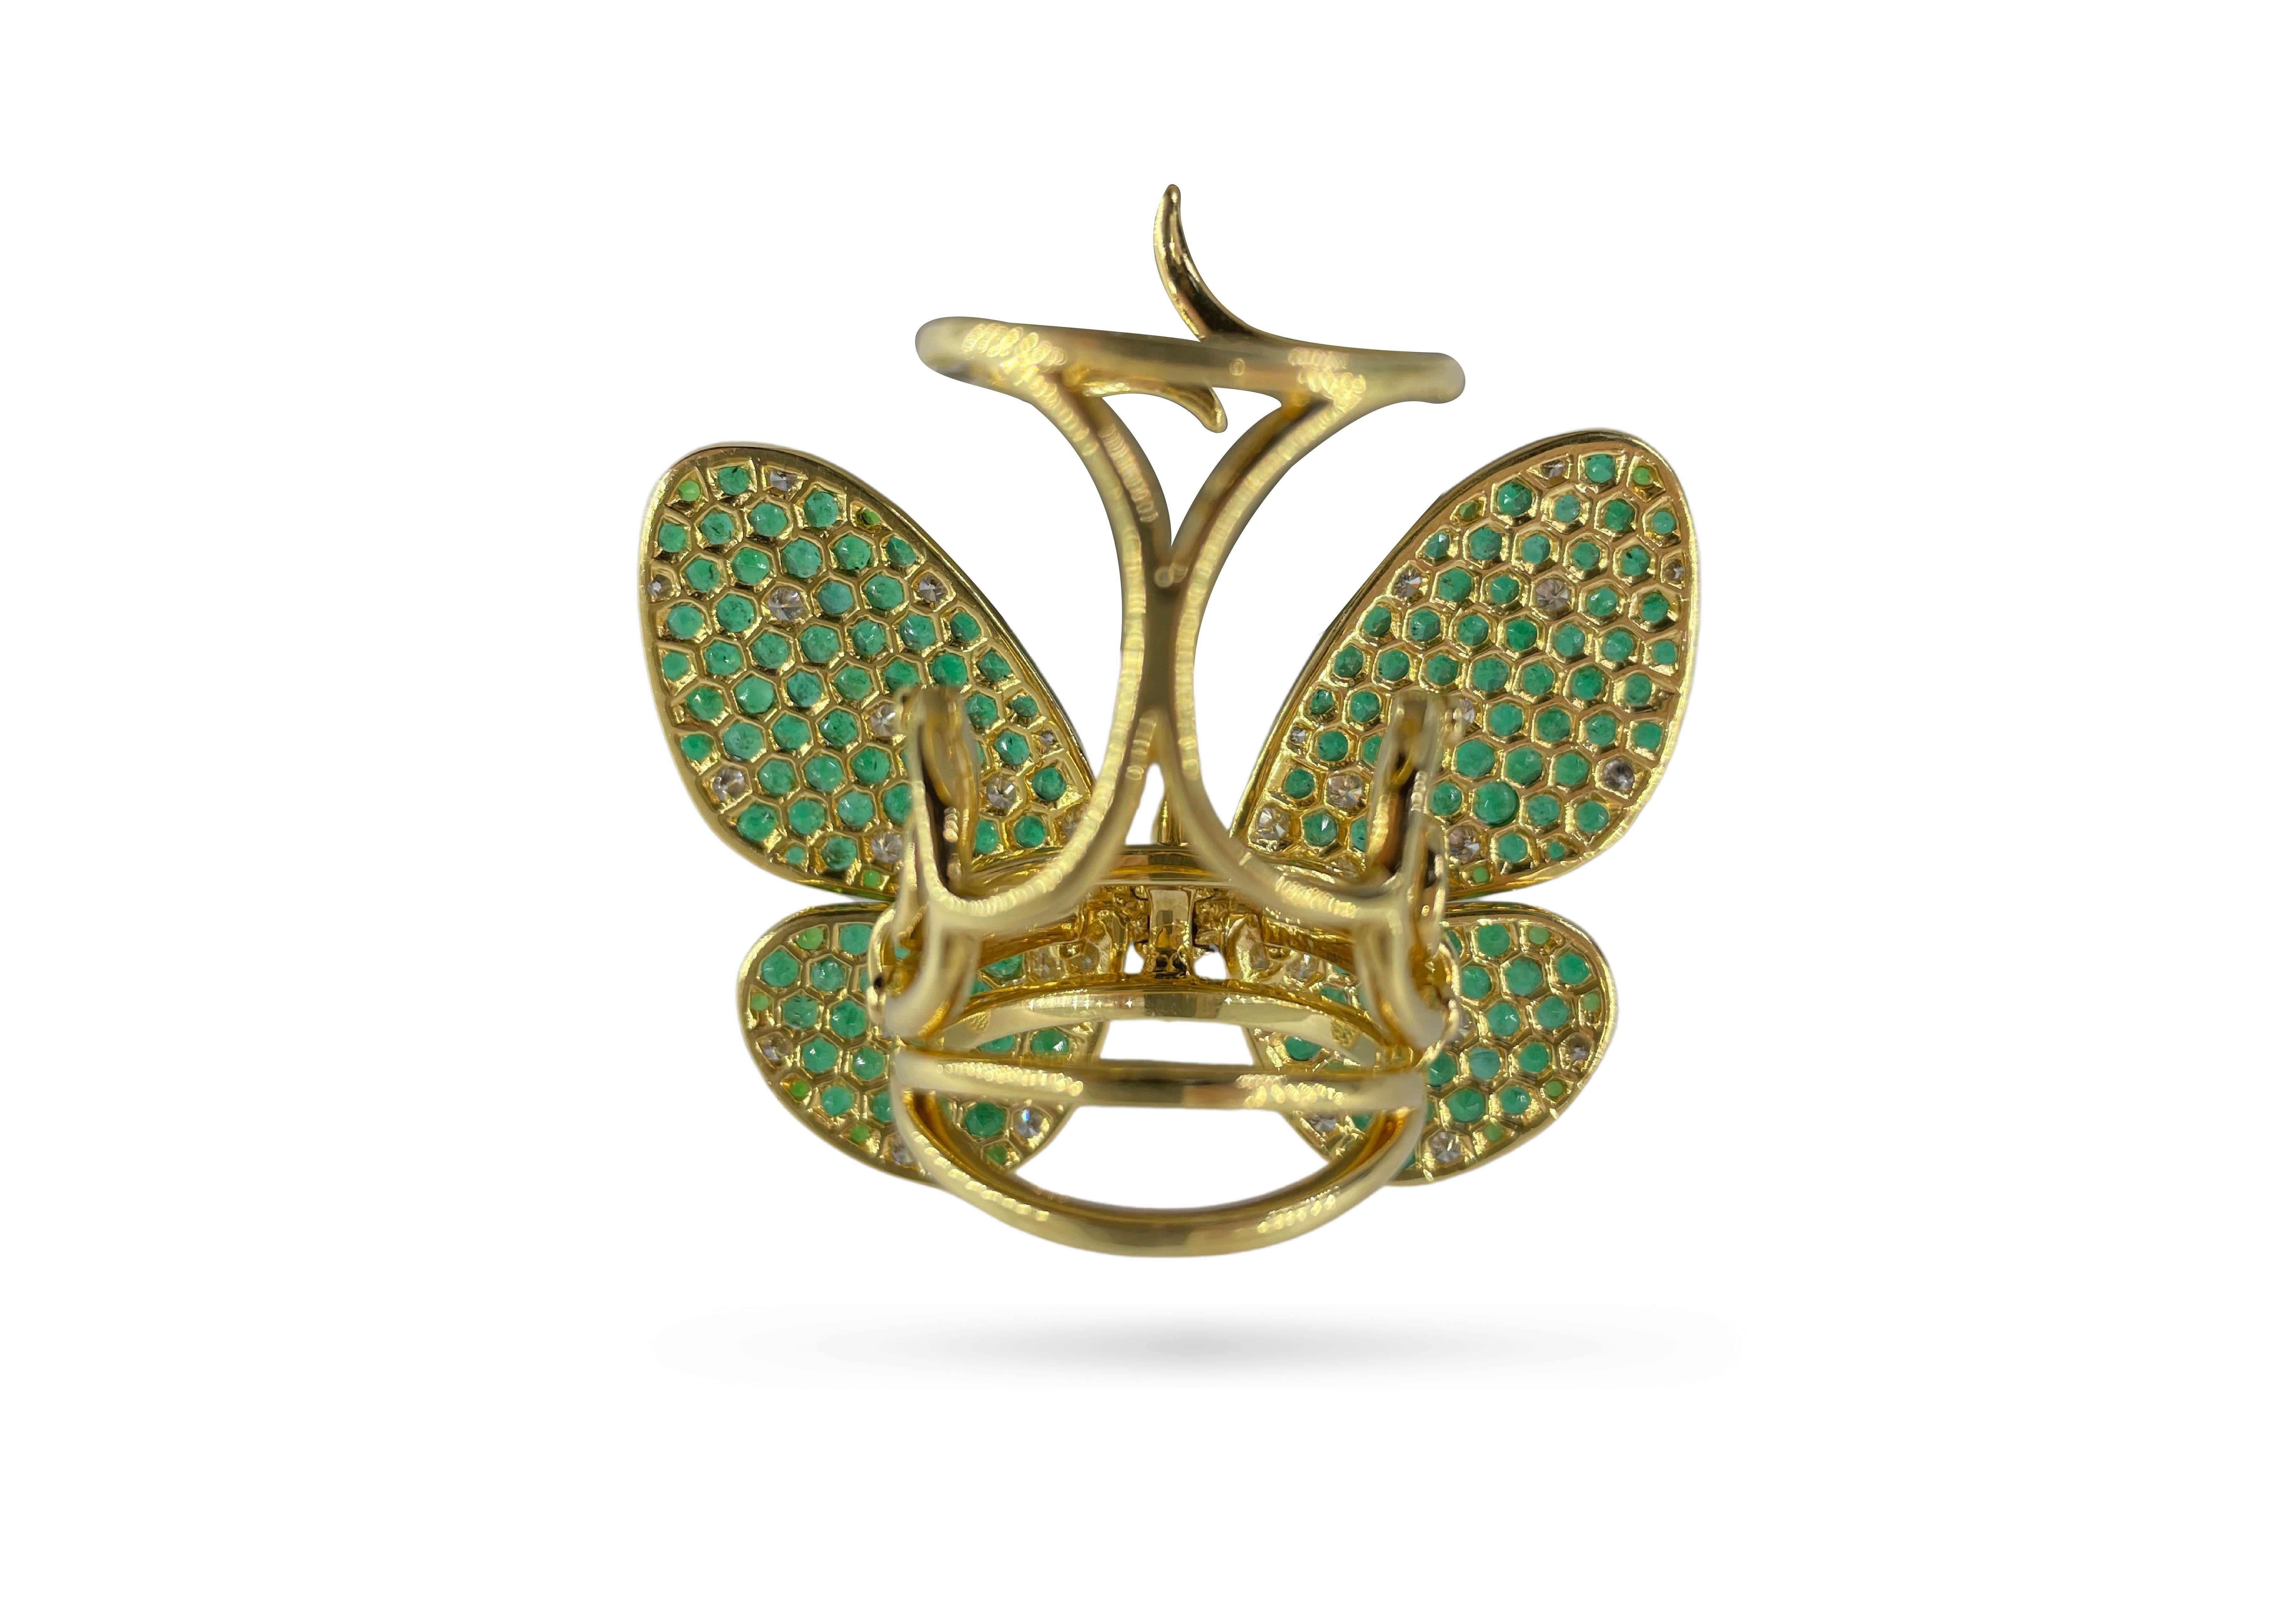 Featuring a playful butterfly motif set with round cut diamonds and green sapphires, Amwaj charming ring captures the beauty of butterfly wings created in shining rows of diamonds and sapphires set in 18 karat yellow gold, each of stone has been